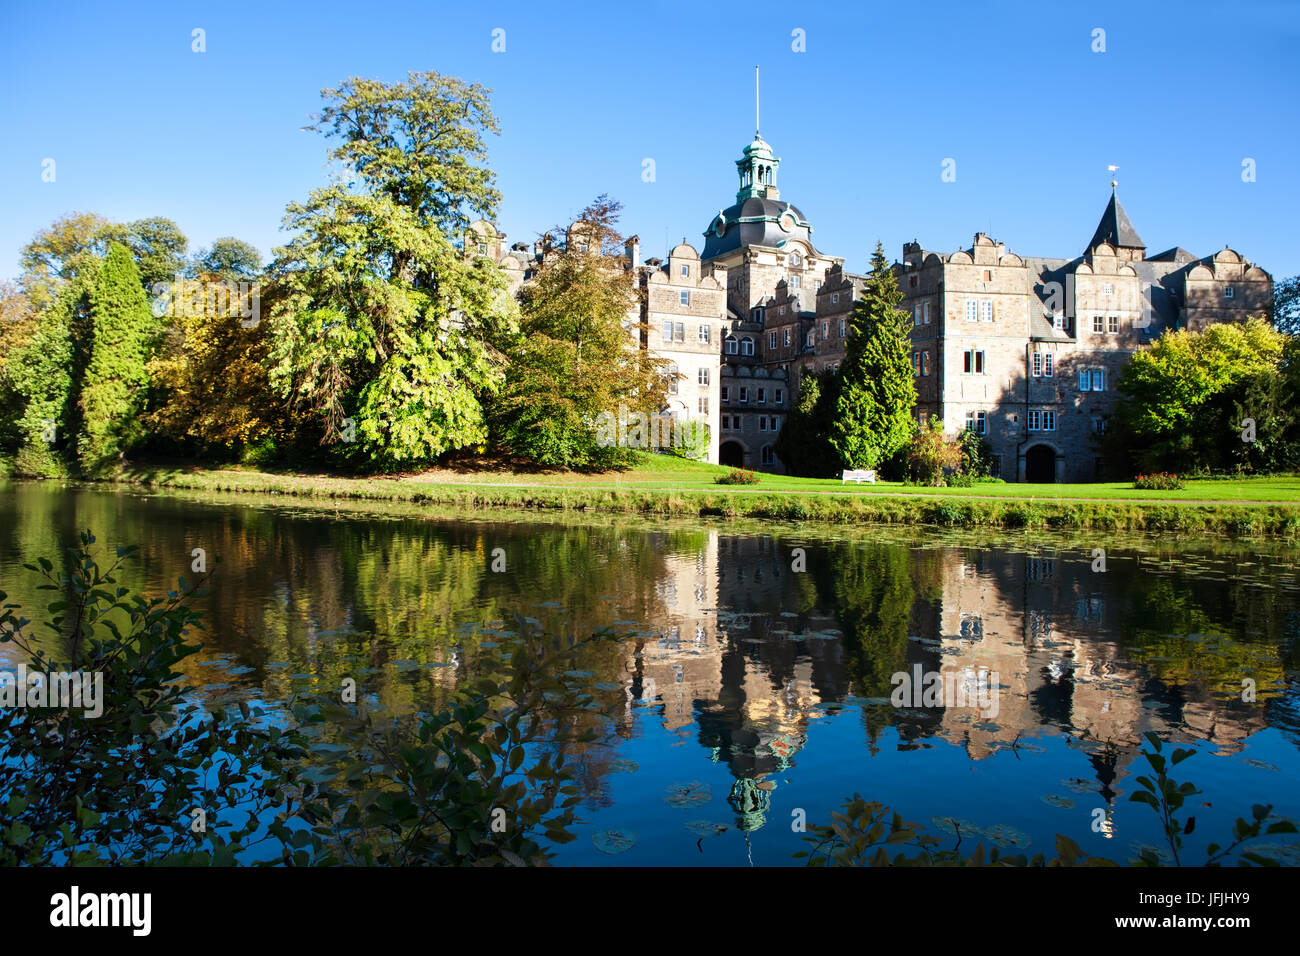 Castle Bueckeburg reflecting in the moat Stock Photo